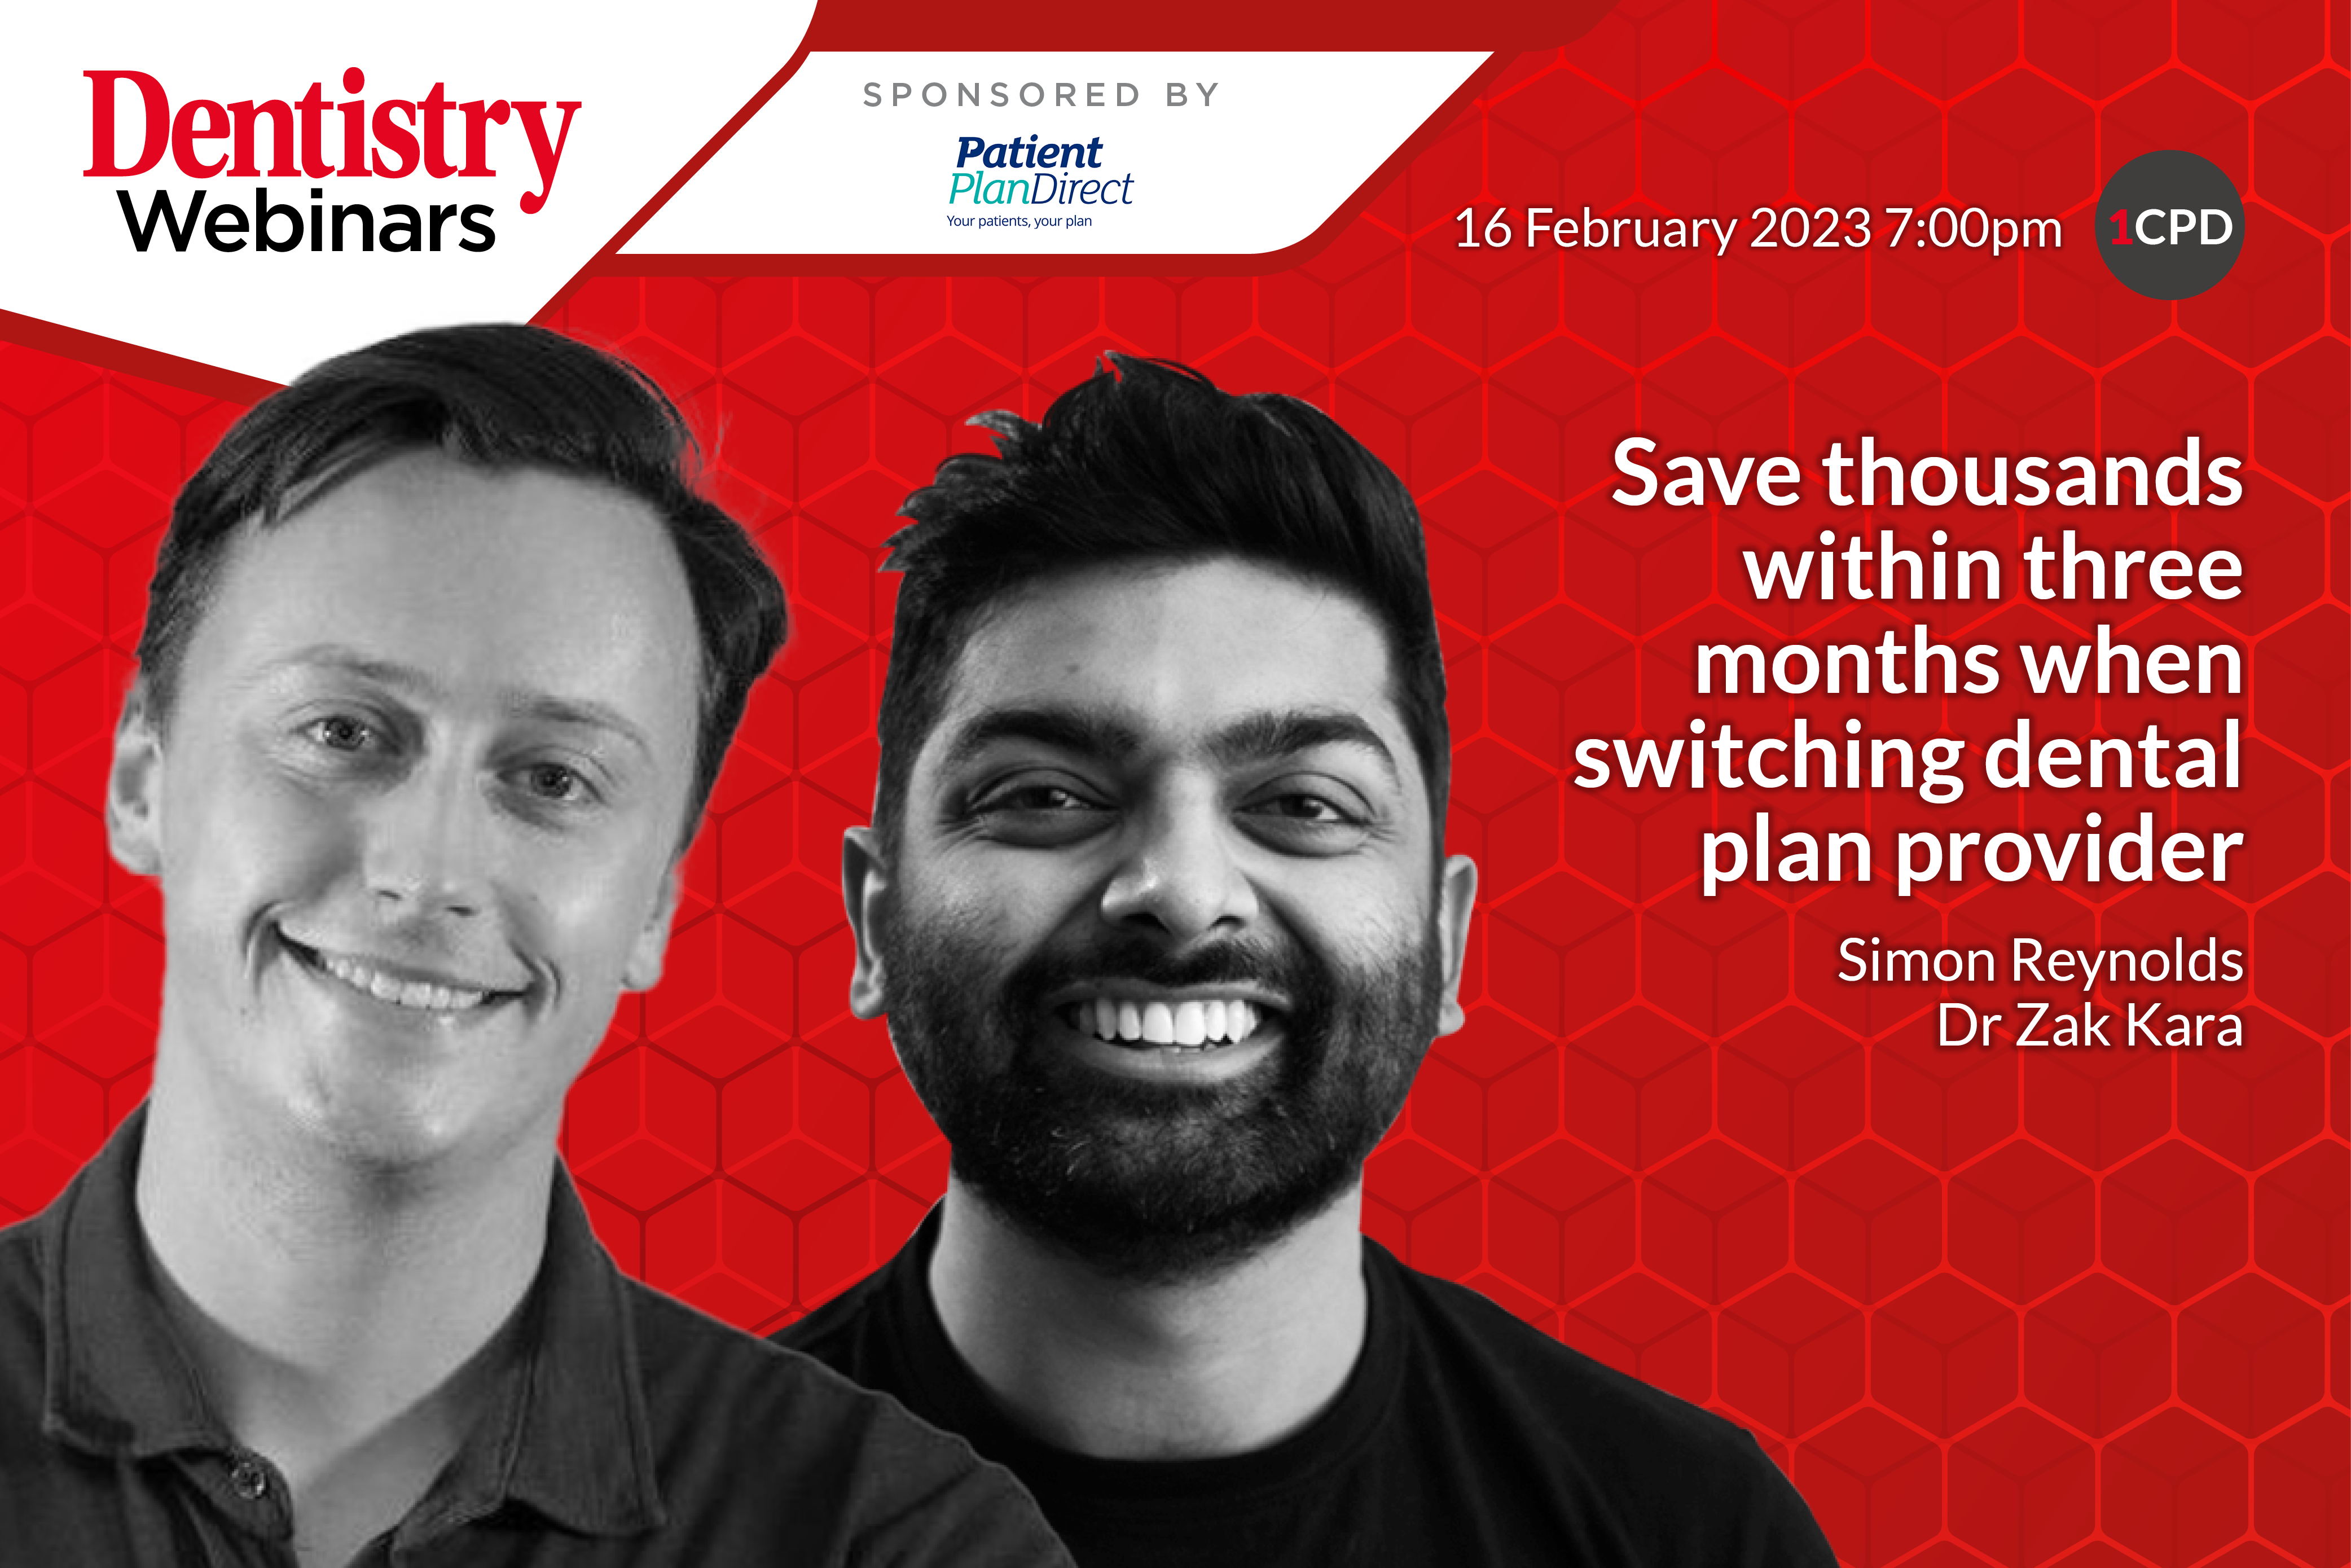 Join Simon Reynolds and Zak Kara on Thursday 16 February at 7pm as they discuss saving thousands when switching dental plan provider.